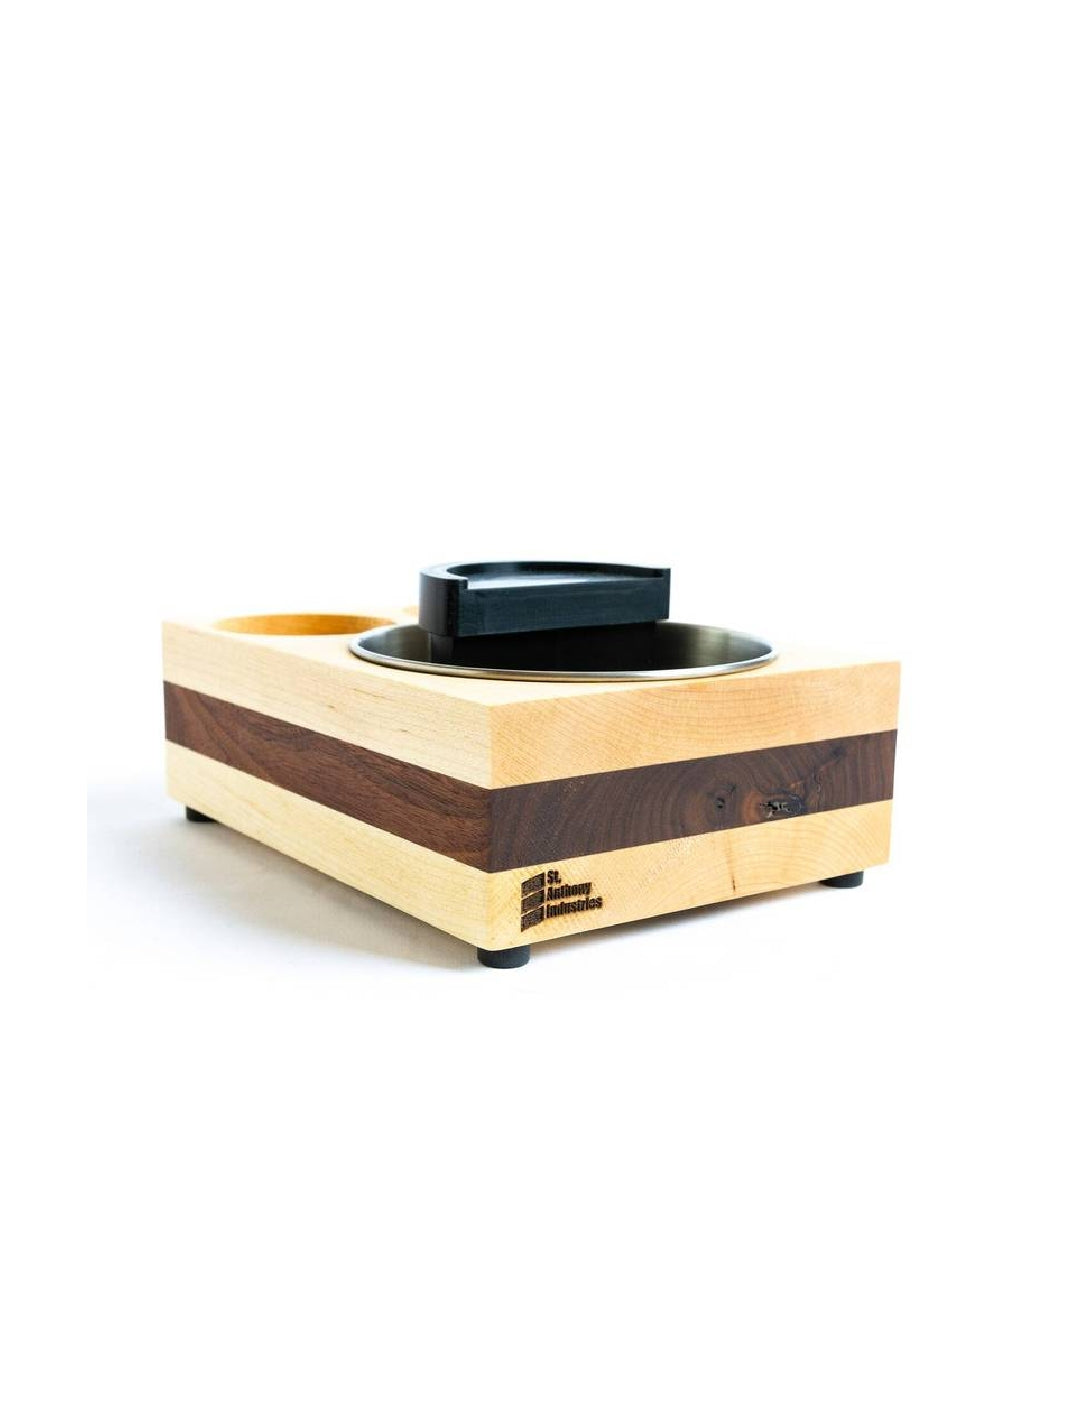 SAINT ANTHONY INDUSTRIES The Bloc Espresso Knock Box and Tamp Station